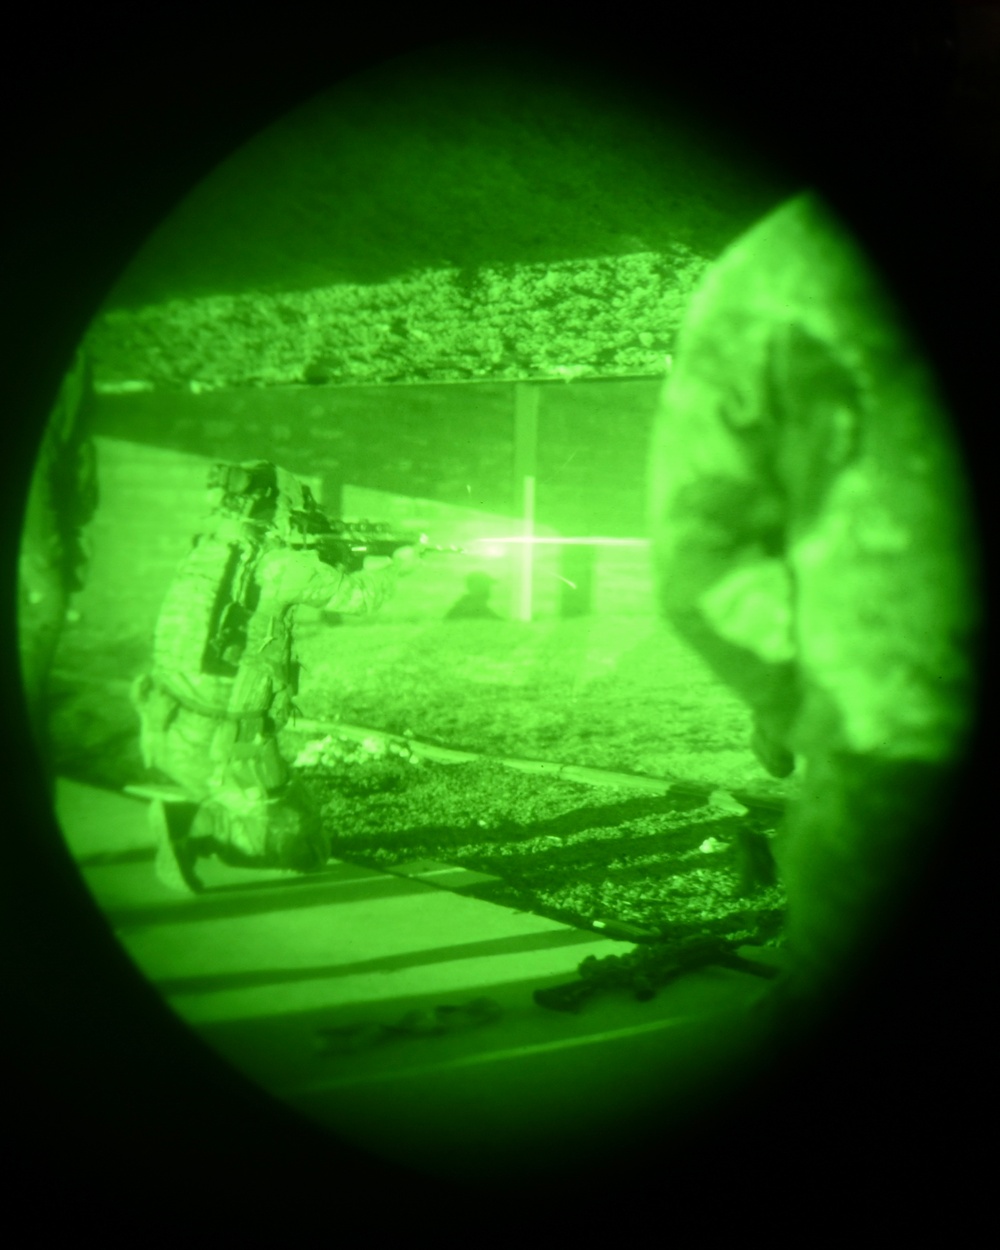 NVG and night qualifications at the range